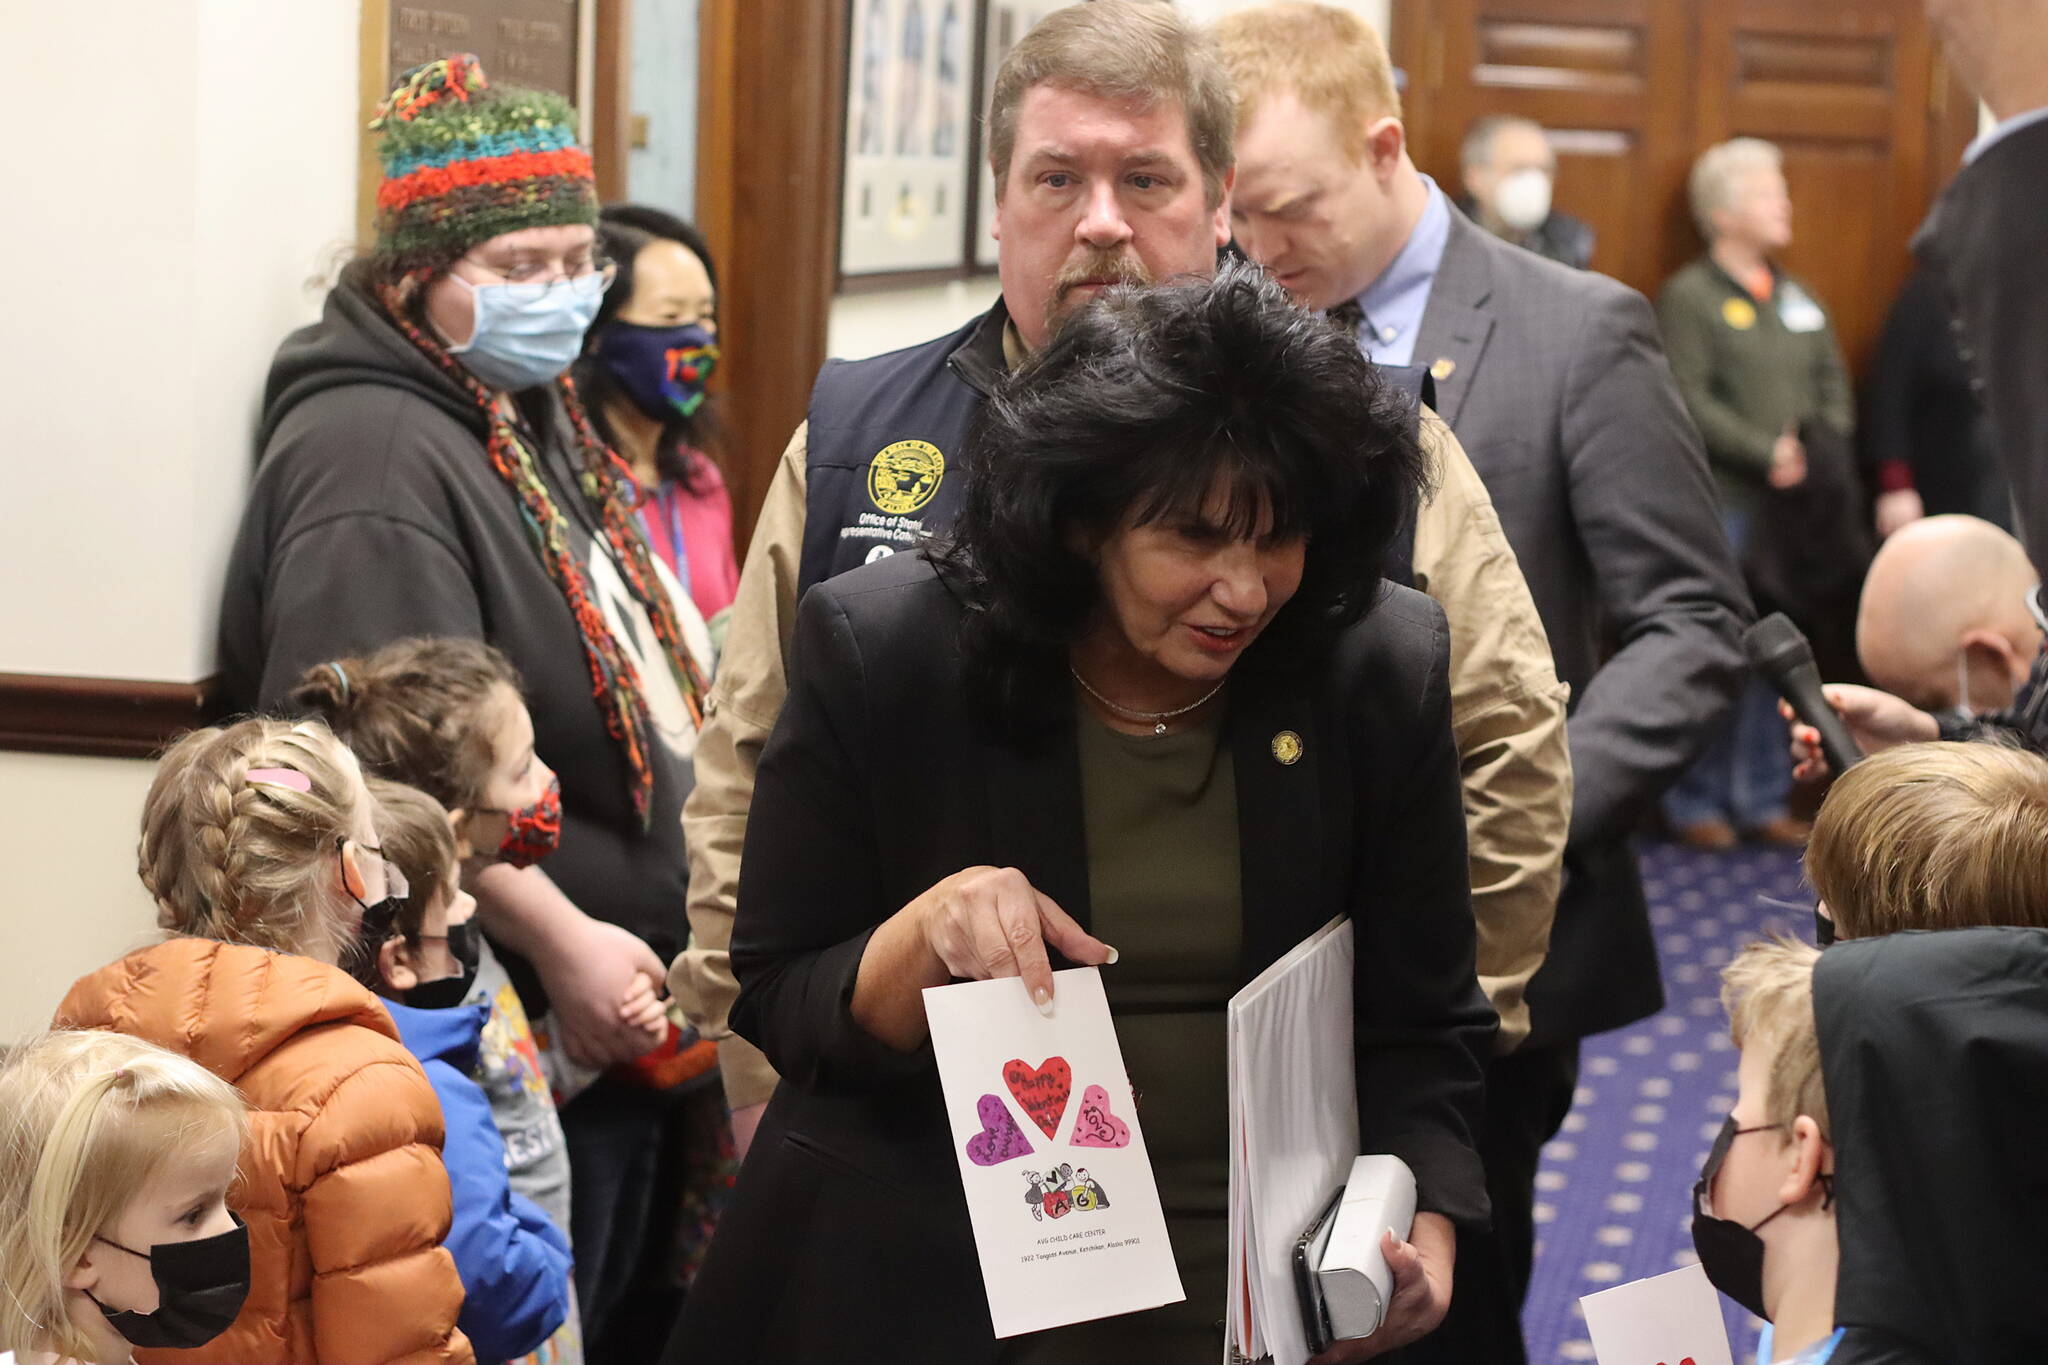 Alaska House Speaker Cathy Tilton, R-Wasilla, accepts a Valentine’s Day card from a Montessori Borealis preschool student in the hallway outside the House chamber at the Alaska State Capitol on Monday. A couple dozen youths from the Juneau Montessori program visited with their parents and teachers during the morning, lobbying for an increase in education funding. Tilton said during a subsequent press briefing she is not ruling out an increase, but is interested in “outside the box” alternatives. (Mark Sabbatini / Juneau Empire)